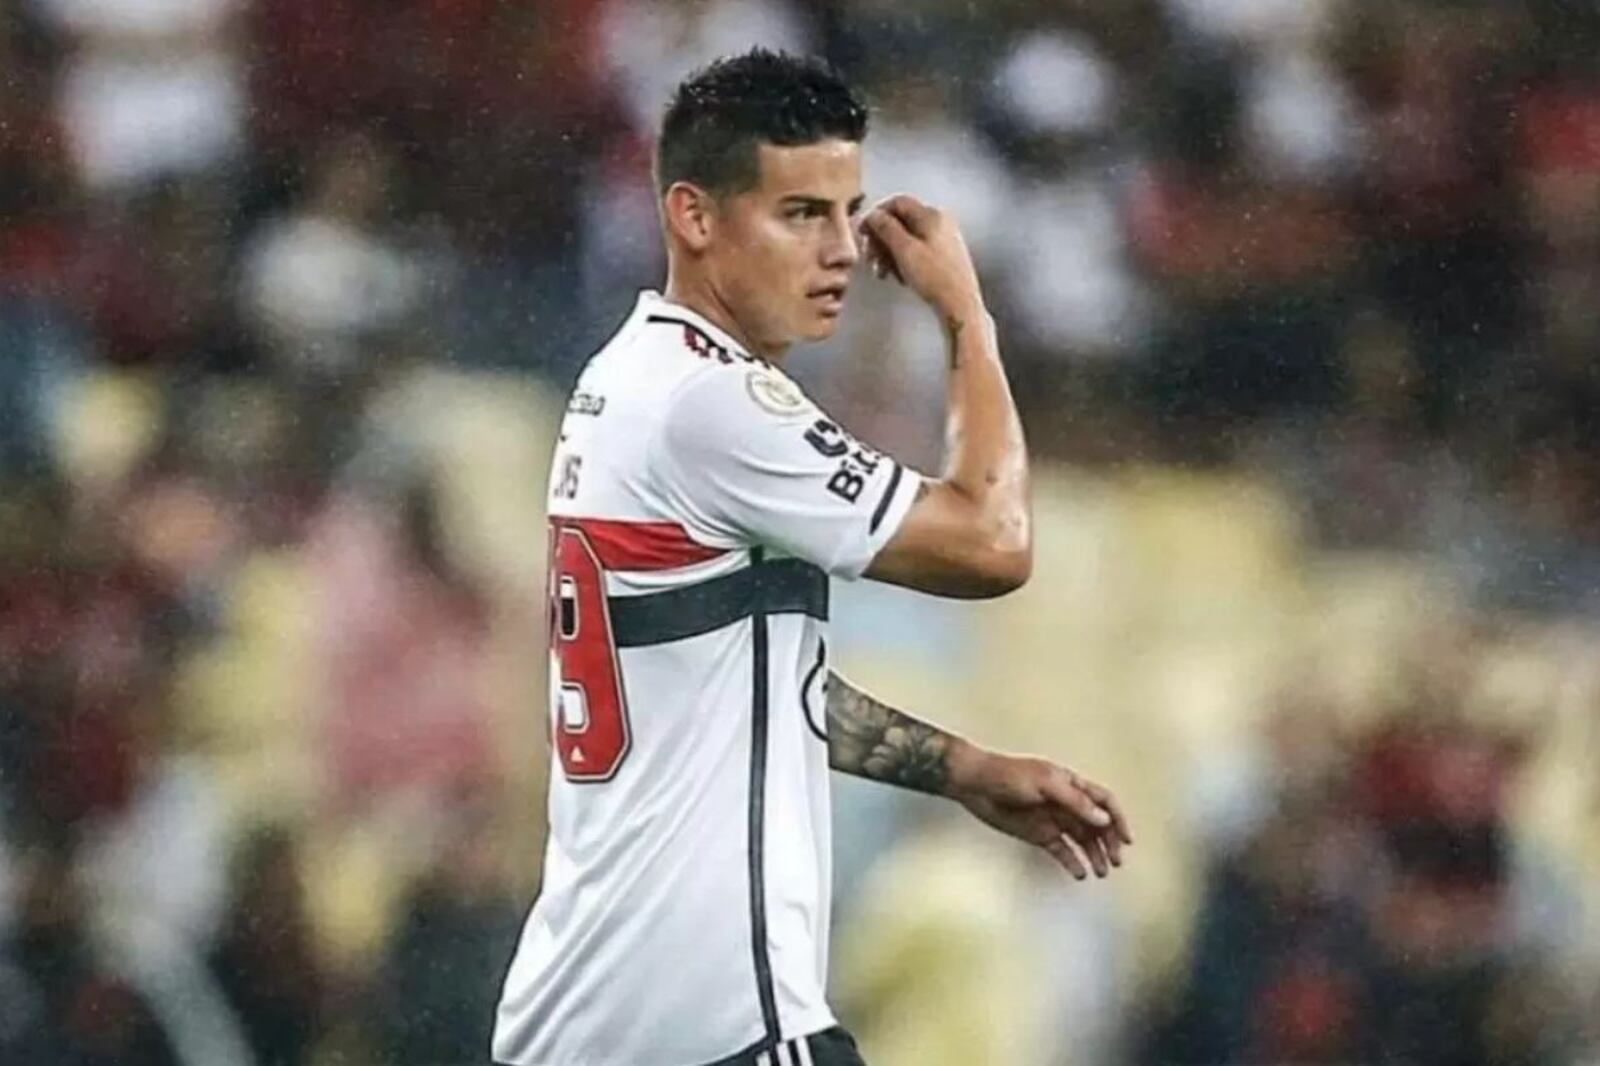 James Rodríguez surprised in his debut with Sao Paulo, this was said in Brazil